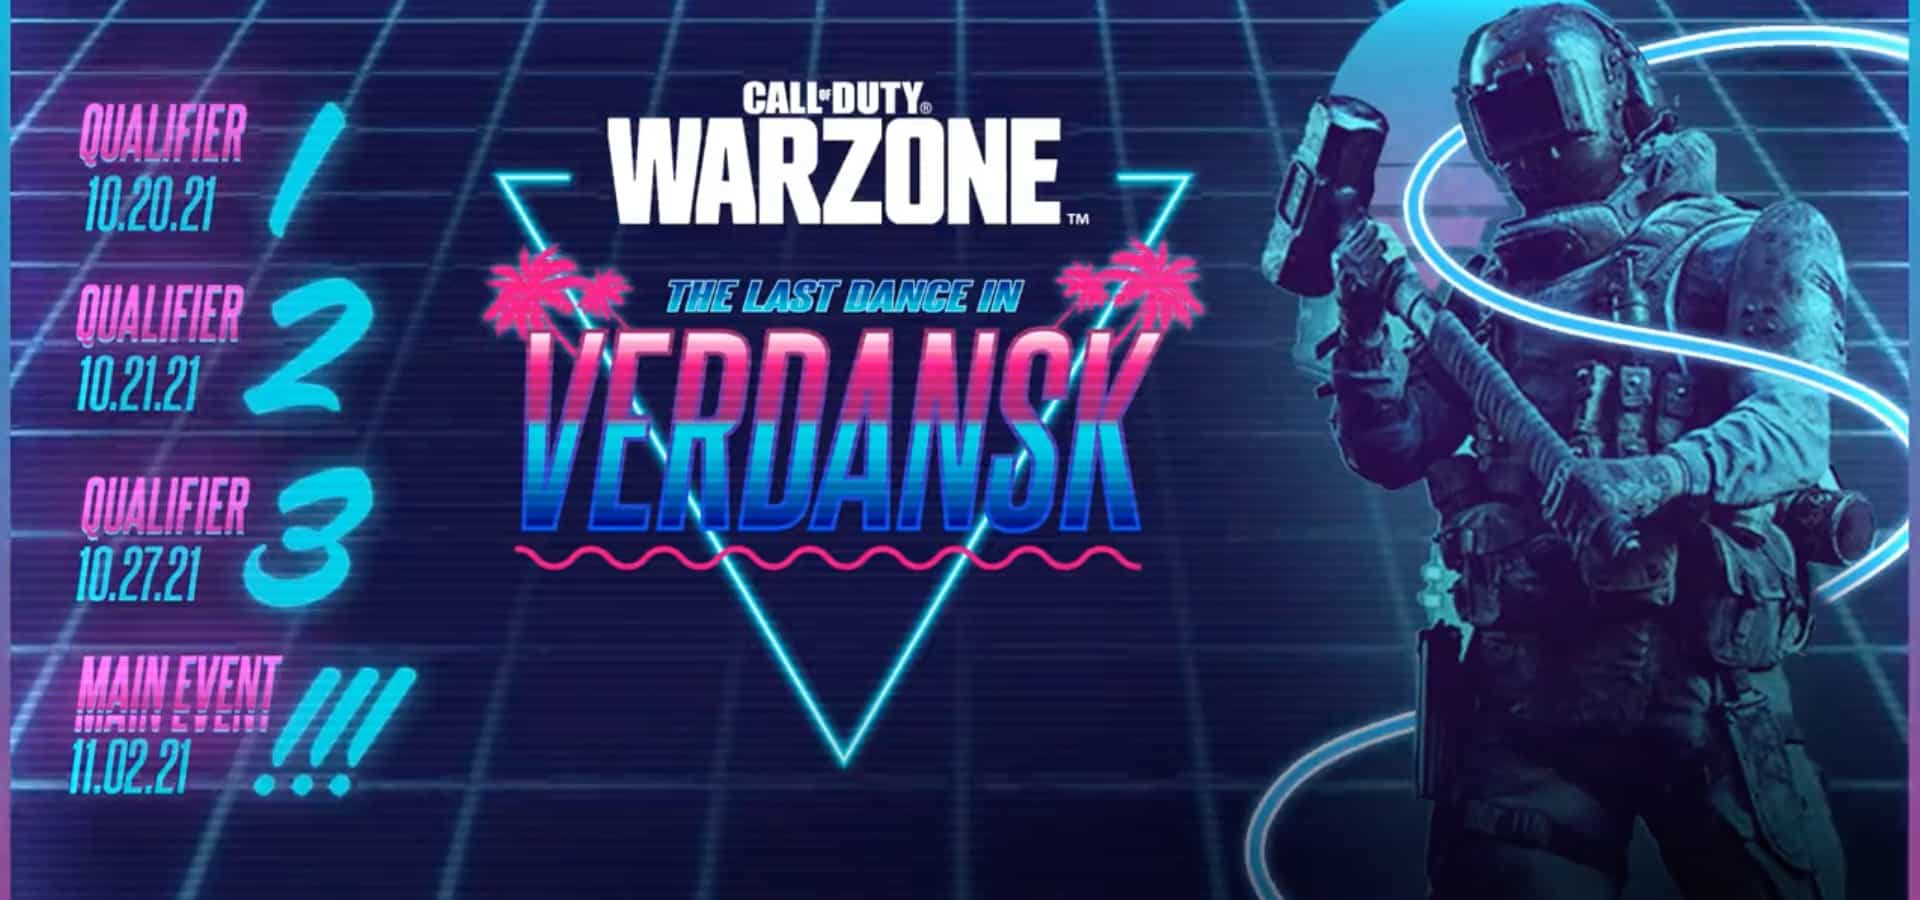 The Last Dance in Verdansk Warzone invitational kick off dates are on 10-20, 10-21, 10-27, and 11-02.